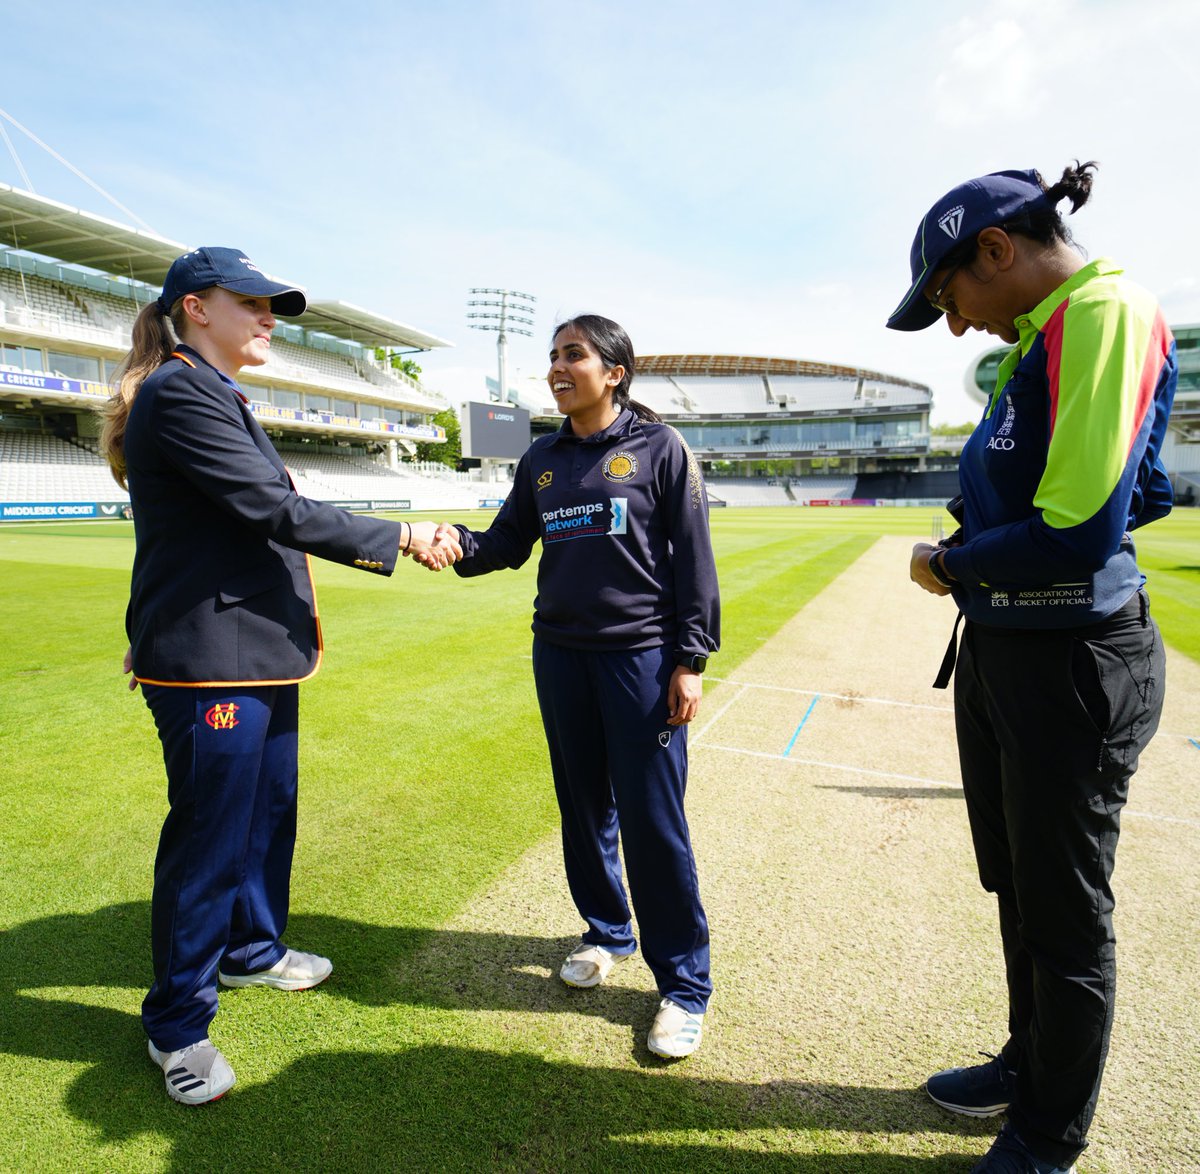 It’s @MCCOfficial Women’s Day at Lord’s today with two T20 matches taking place 🙌 MCC v Dorridge CC is just about to get underway. 🎙️ Live commentary: lords.org/womensday #LoveLords